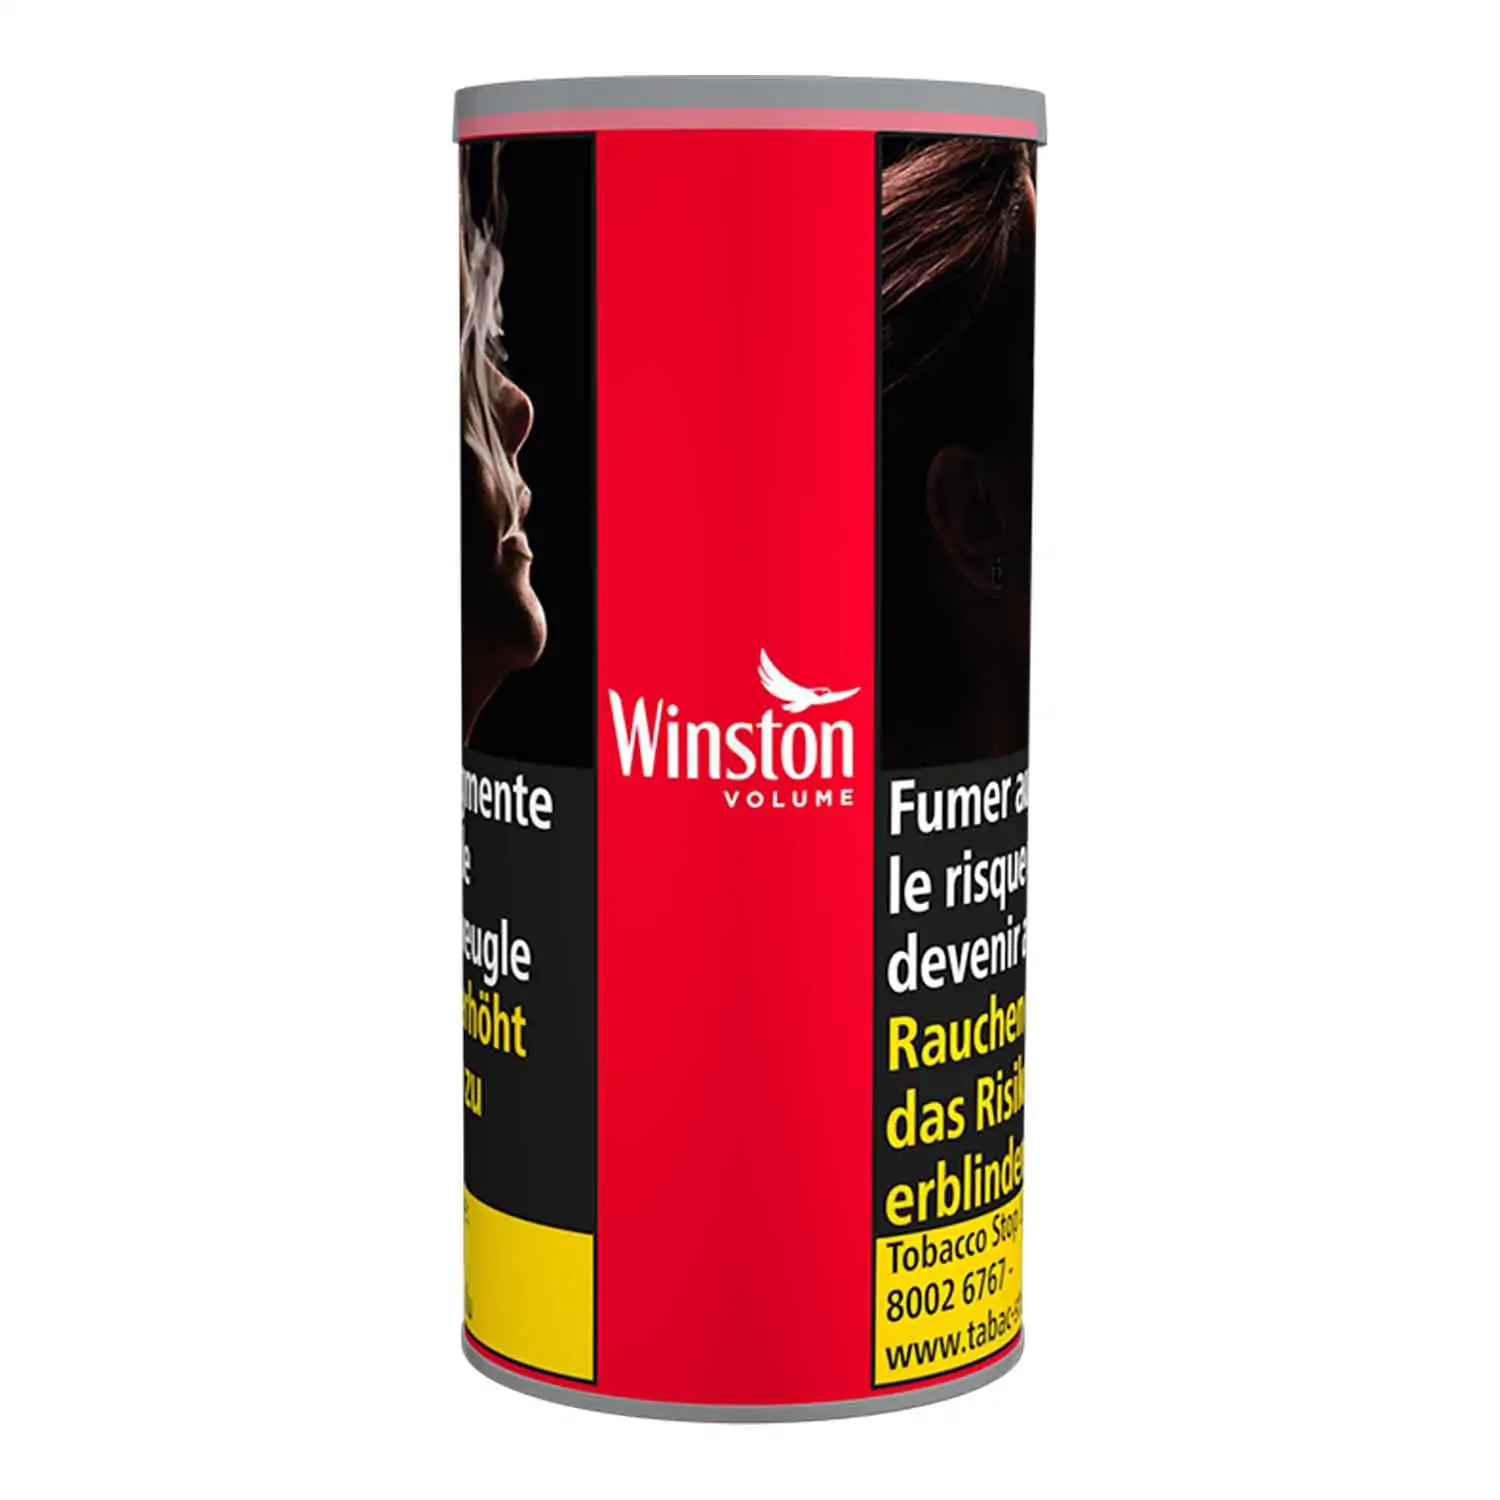 Winston volume red 125g - Buy at Real Tobacco